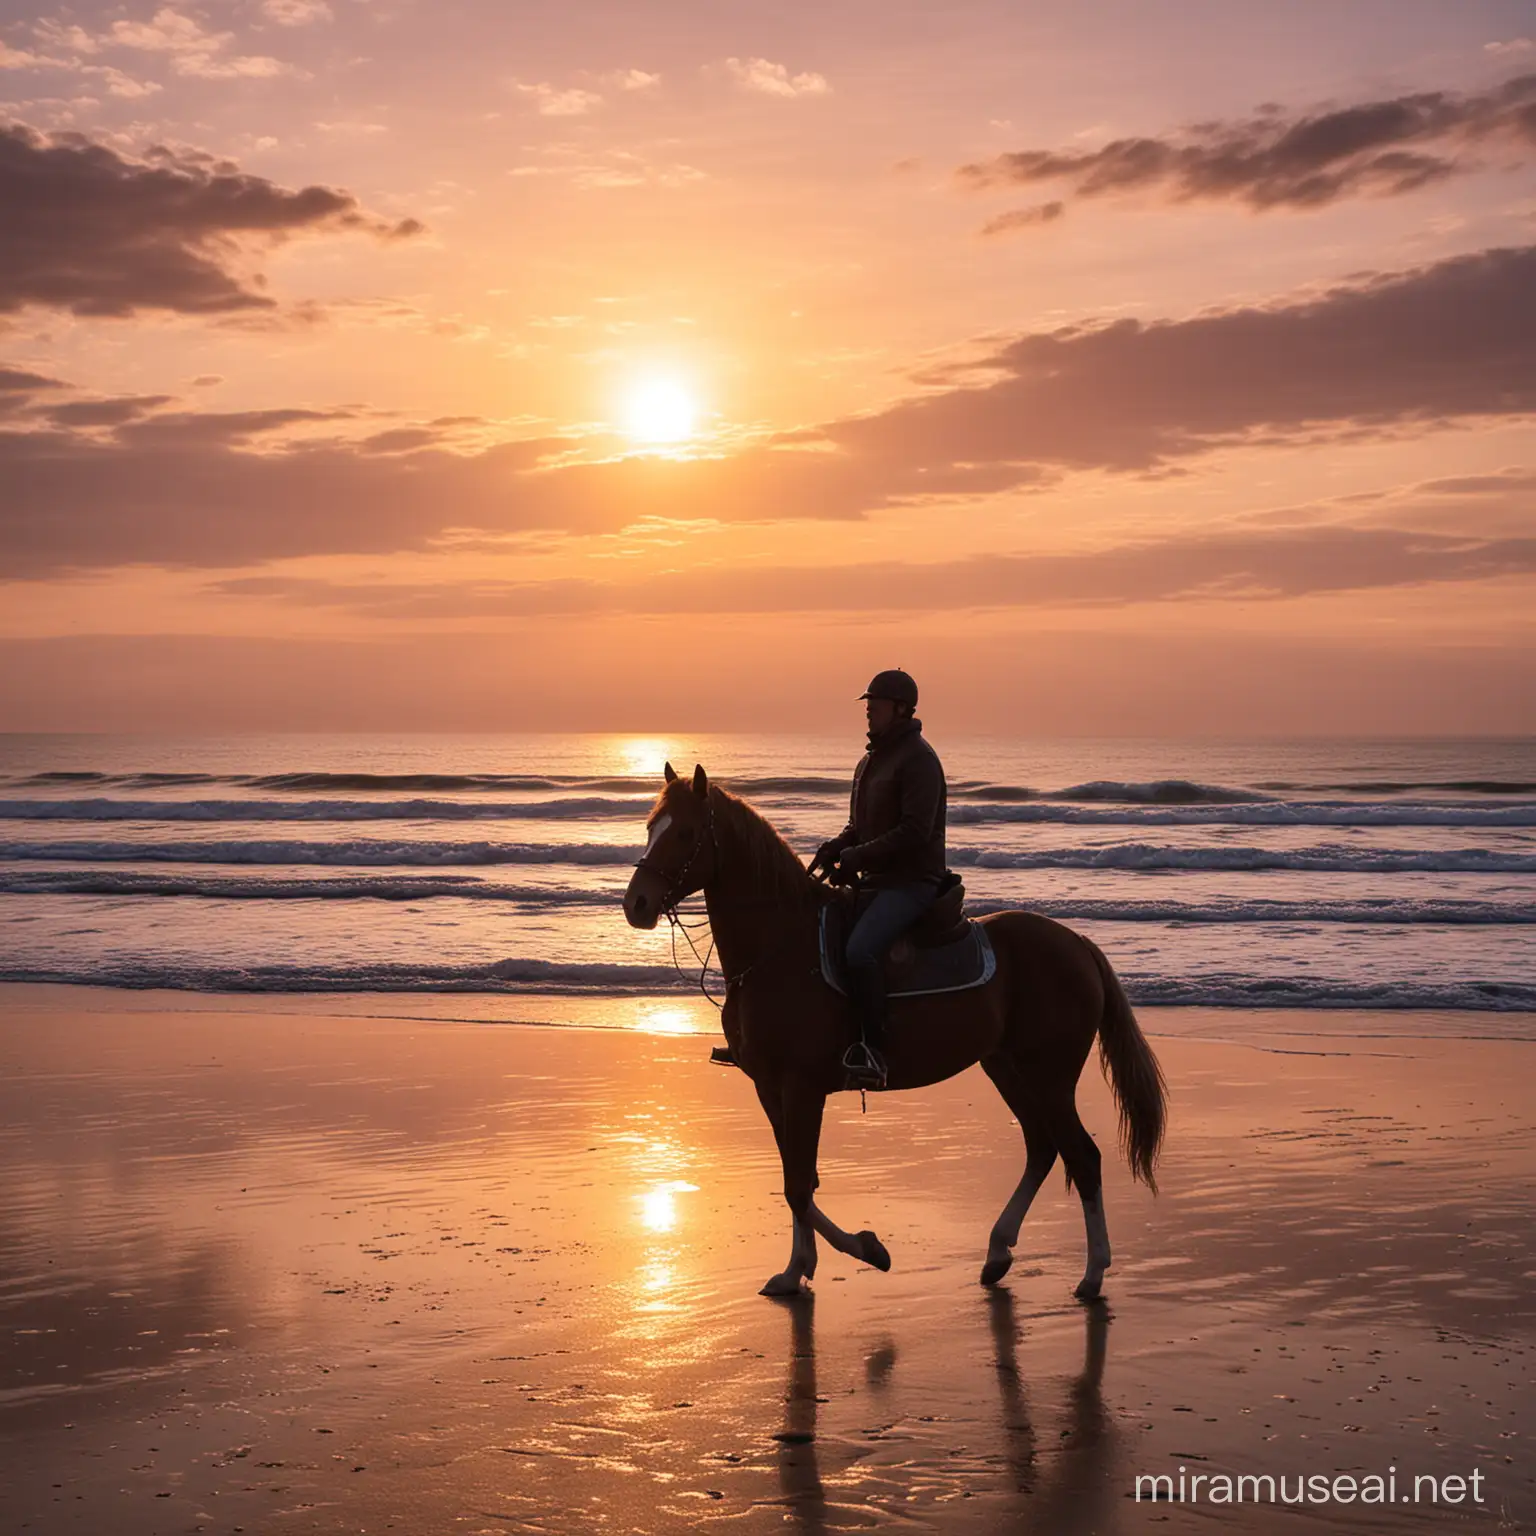 create a photo of the most beautiful sunset ever as seen from De Panne, Belgium. Add Olaf Scholz, riding a horse
 on the beach, face lit by the sun, 